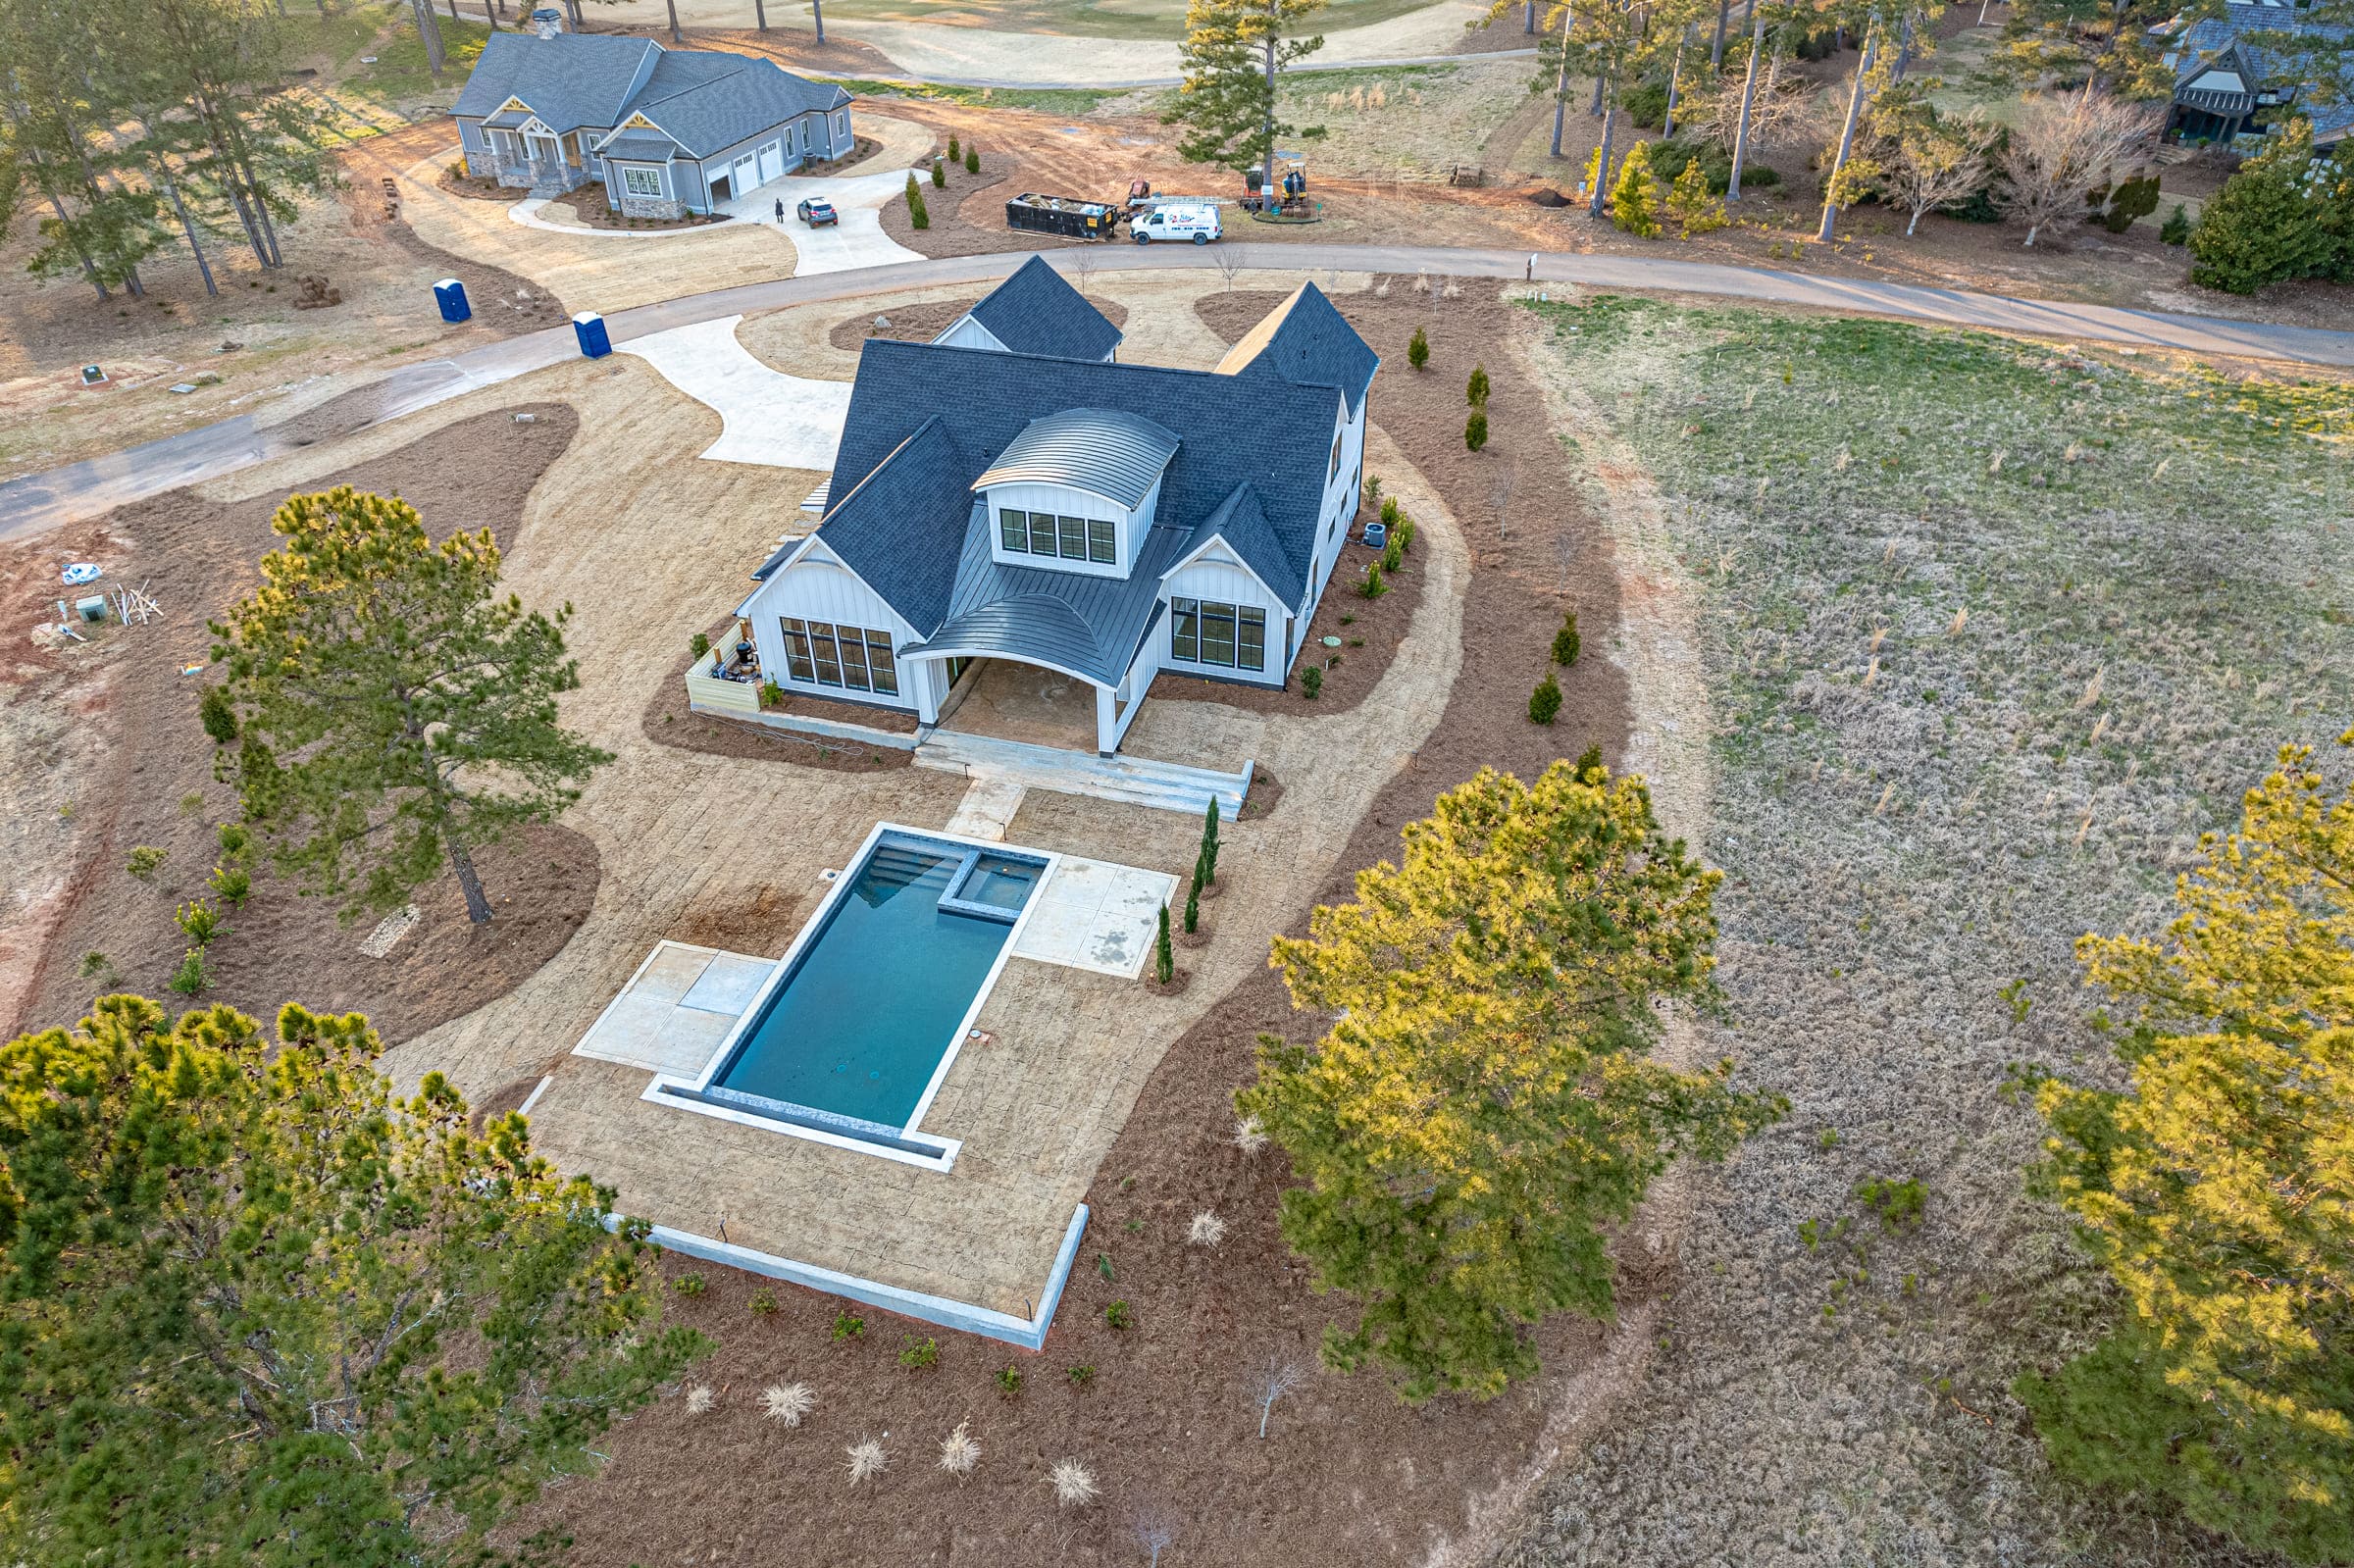 Birds Eye-View Shot of House and Built-in Pool |PAXISgroup